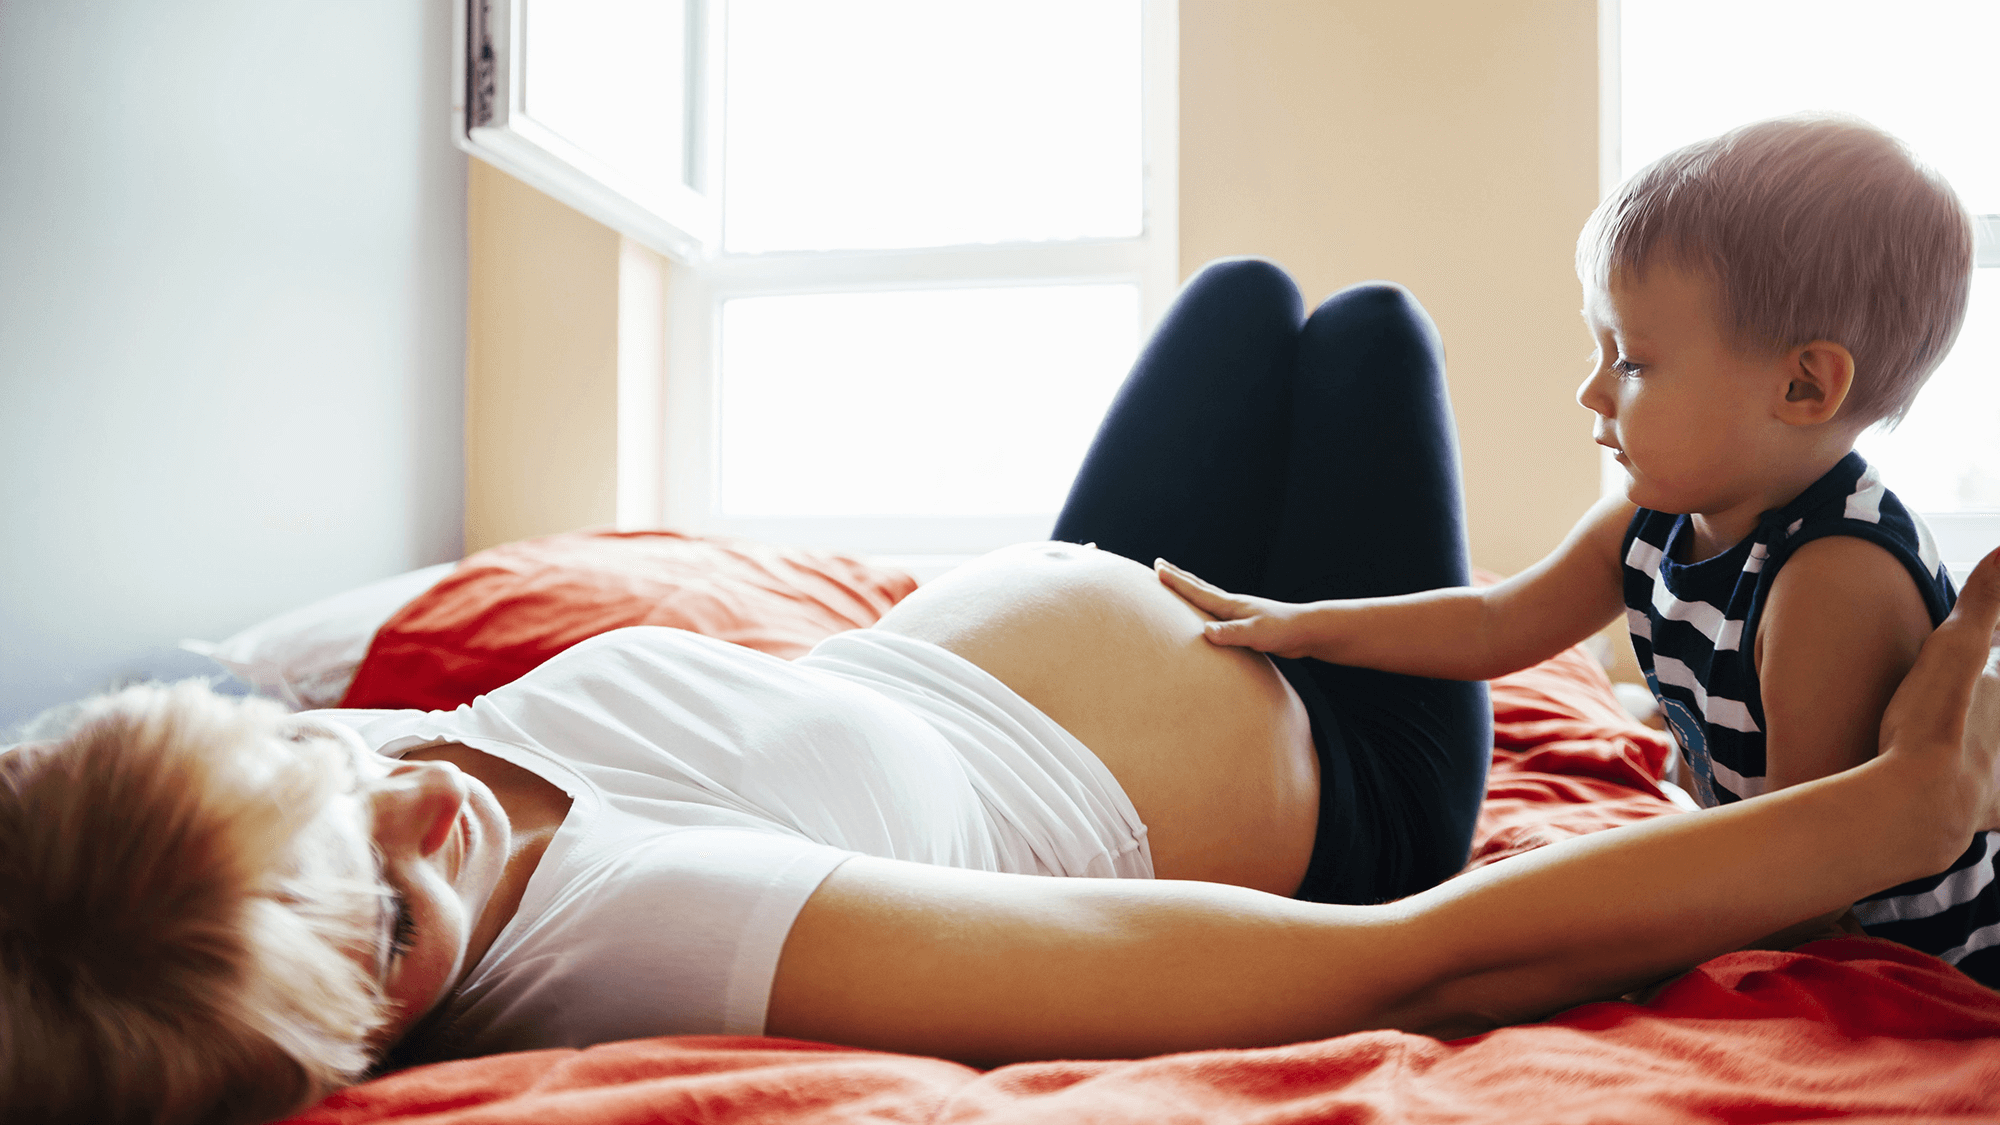 Your Belly Is Accommodating Your Growing Baby